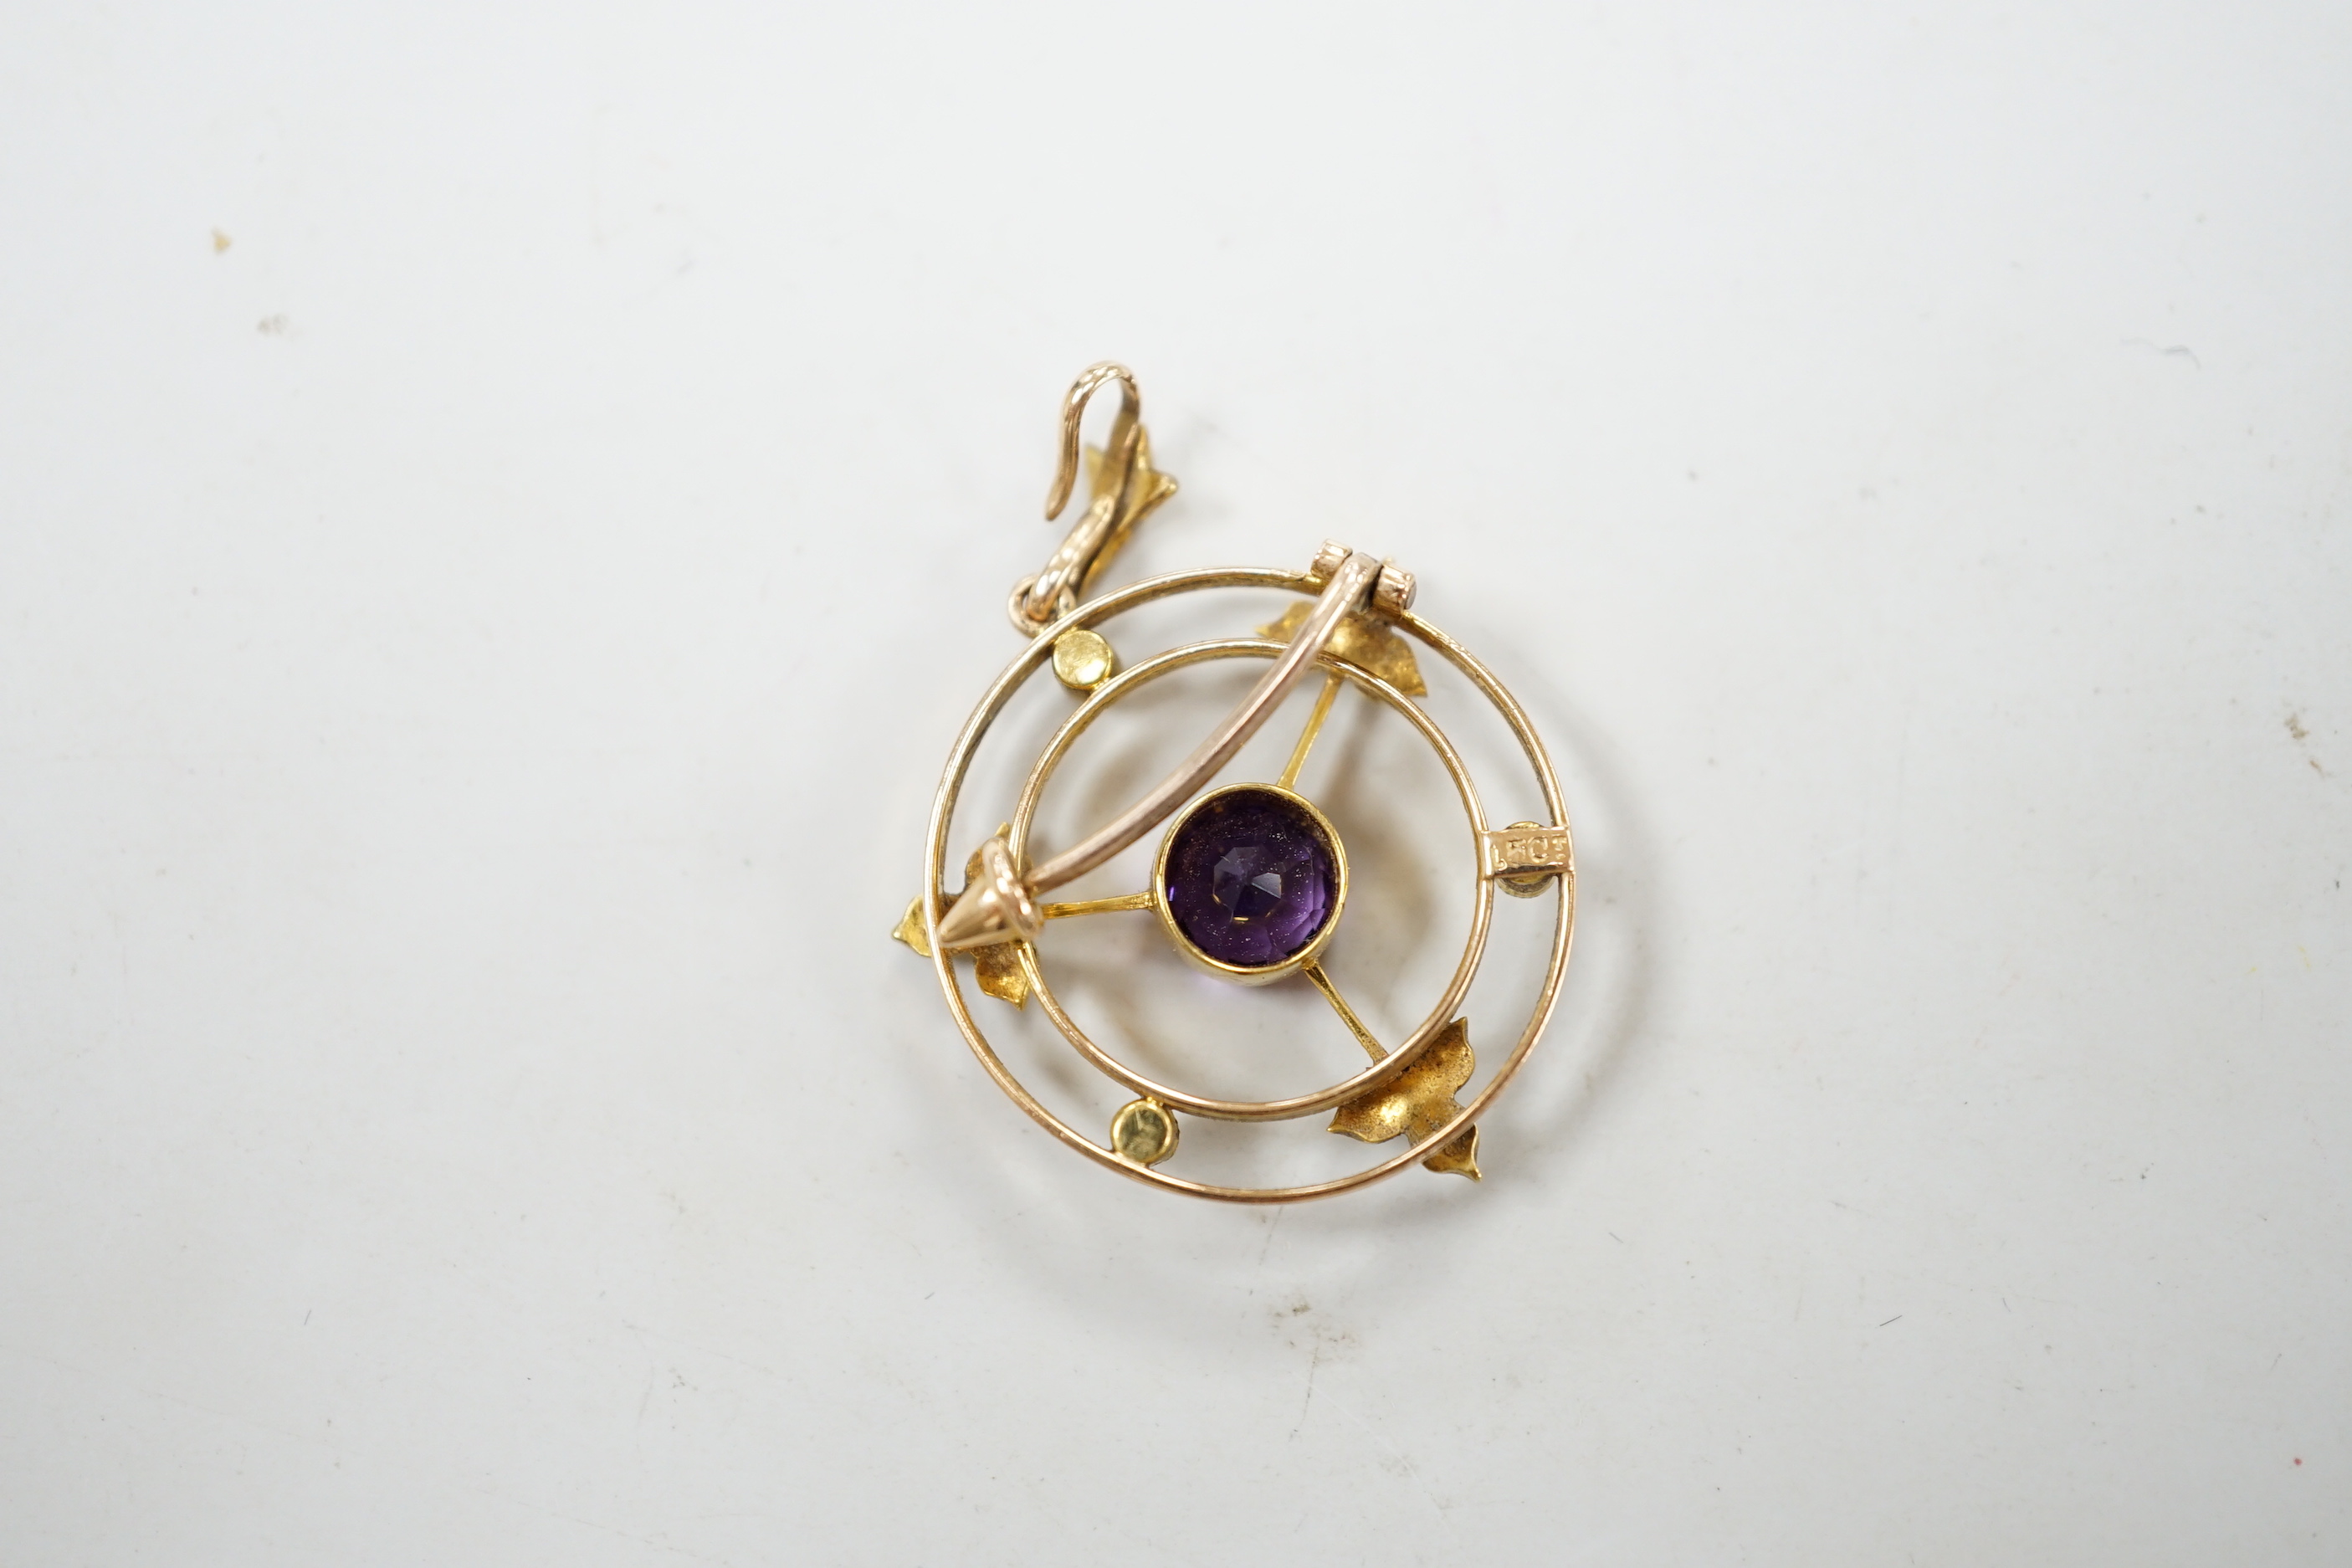 An Edwardian 15ct, amethyst and seed pearl set pendant brooch, overall 36mm, gross weight 4.1 grams, in fitted leather box.